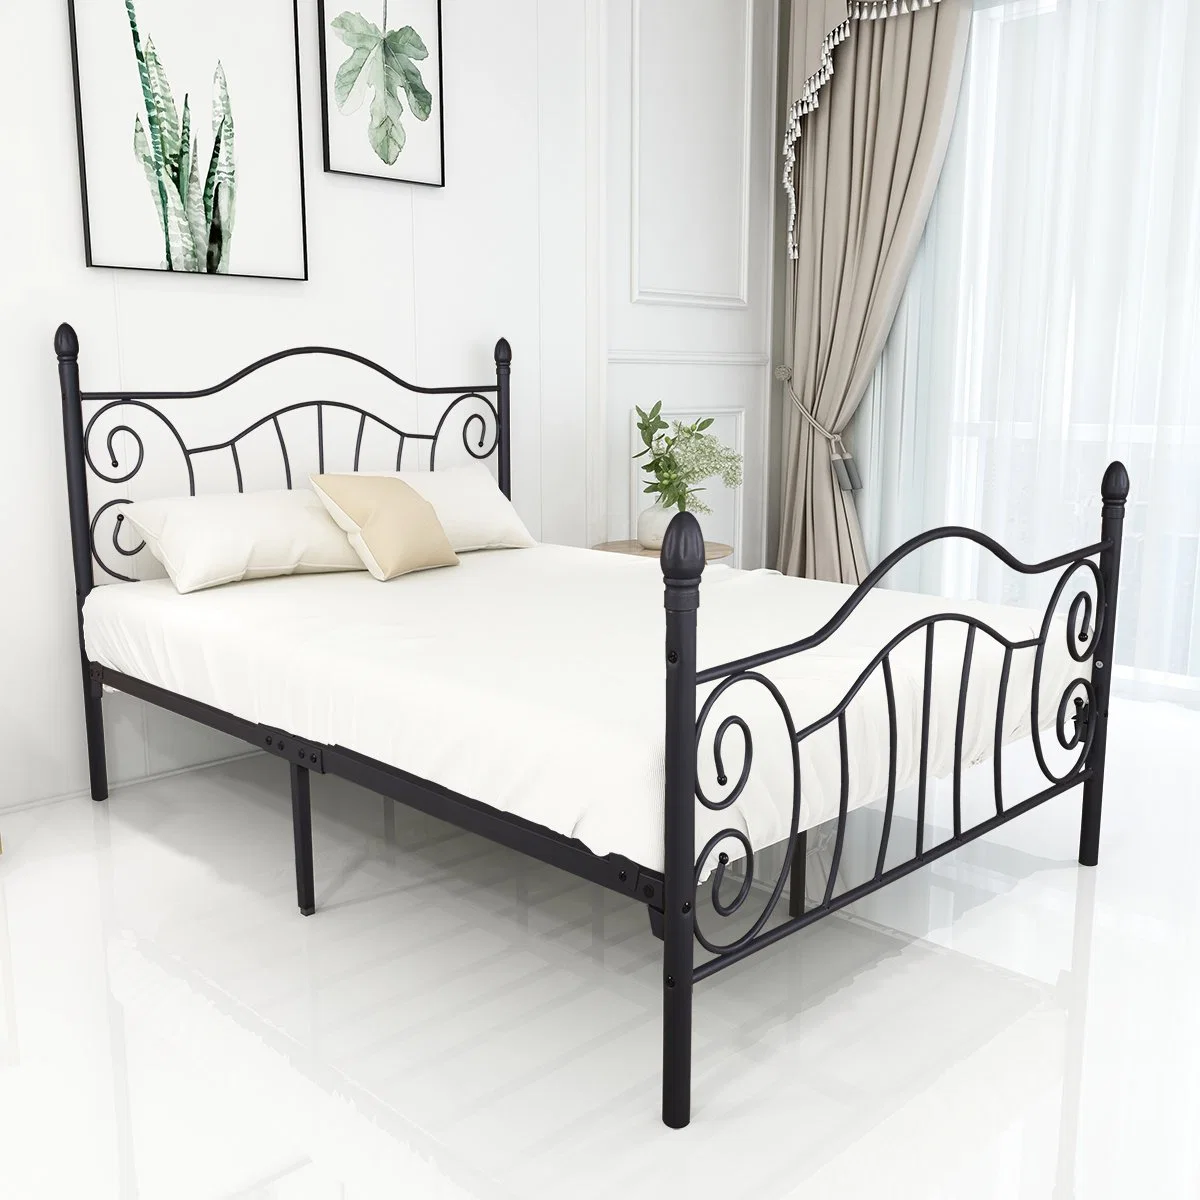 Iron Art Nordic Vintage Bed Double Metal Bed